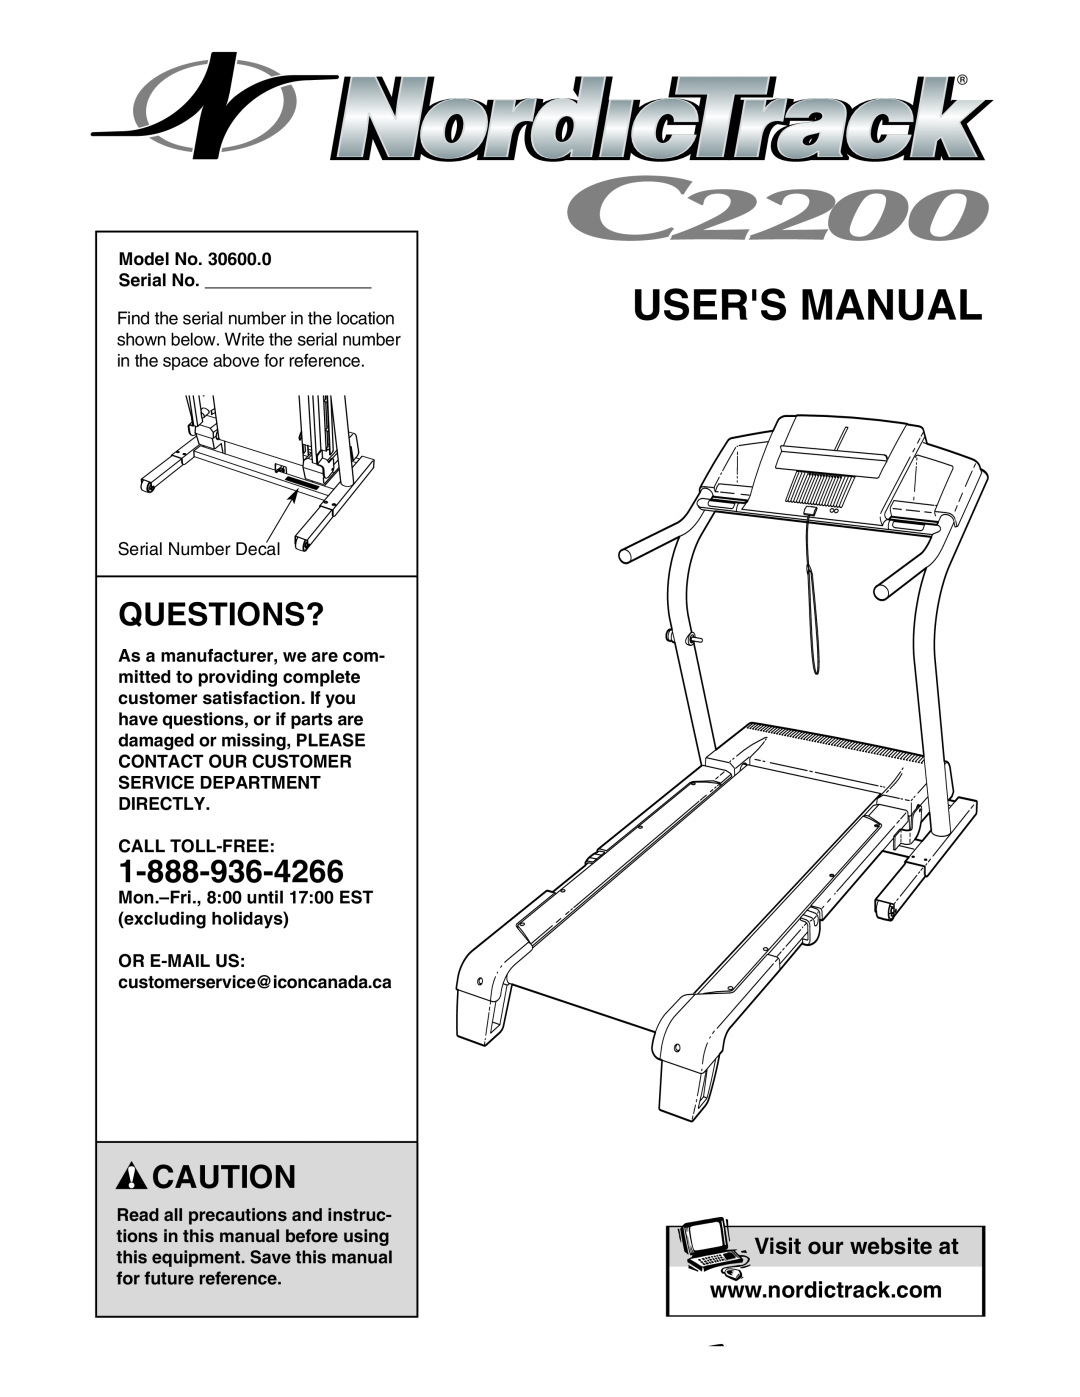 NordicTrack 30600.0 user manual Questions?, Users Manual, Visit our website at 